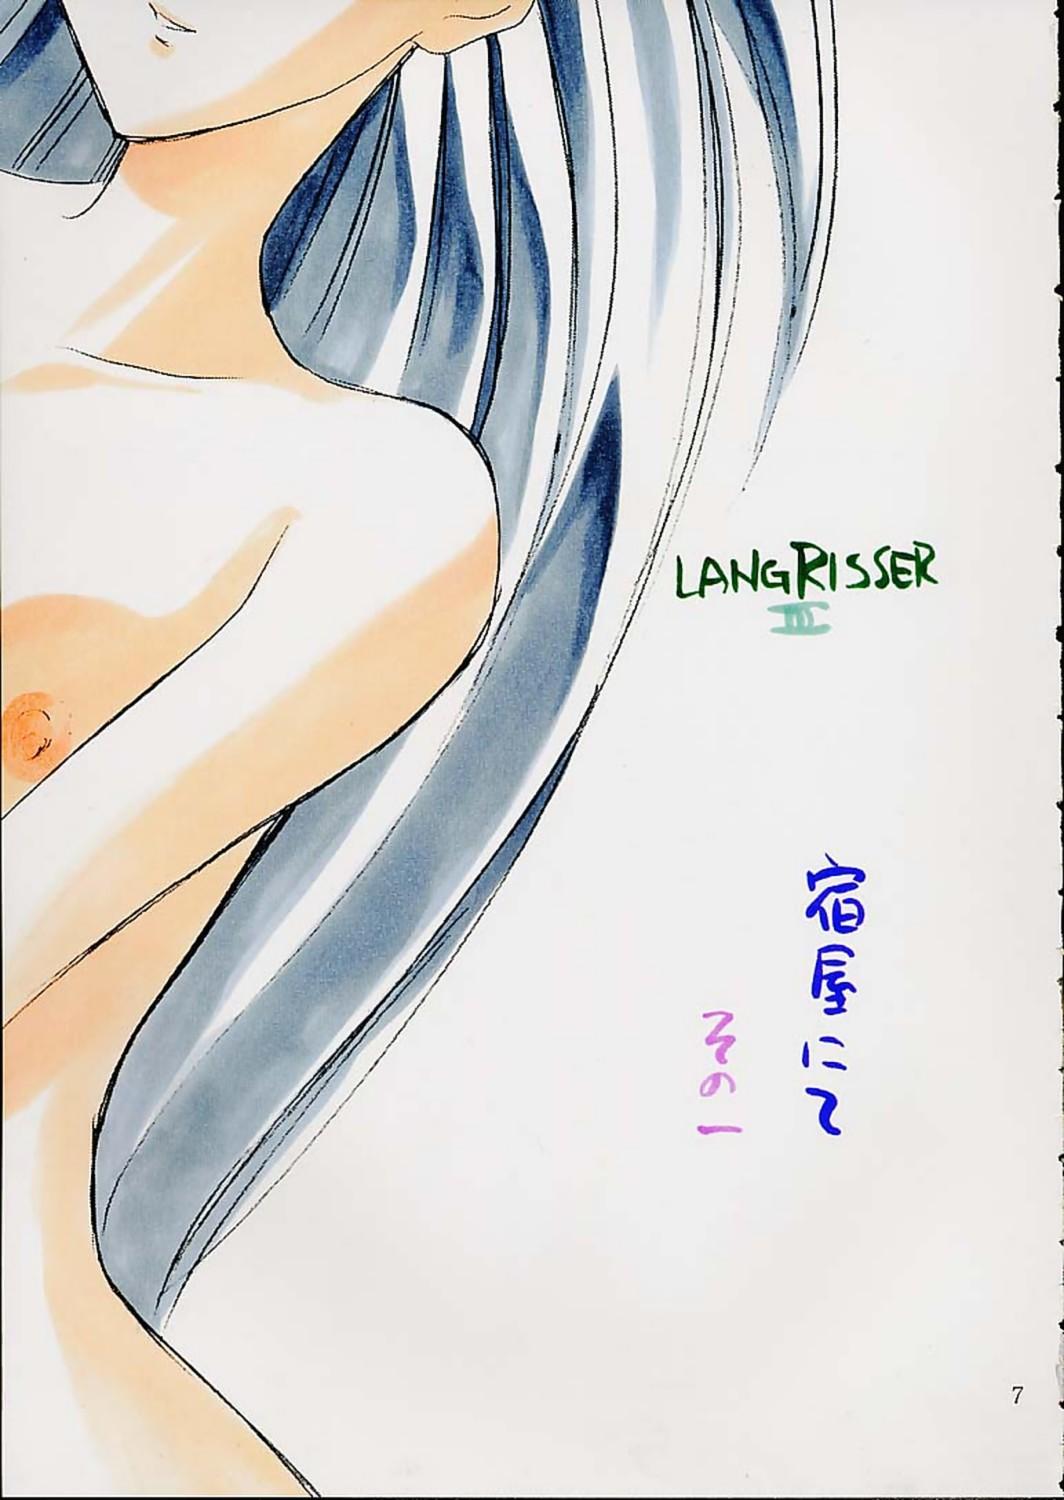 Asian Babes WHAT IS LOVE - Langrisser Oralsex - Page 5